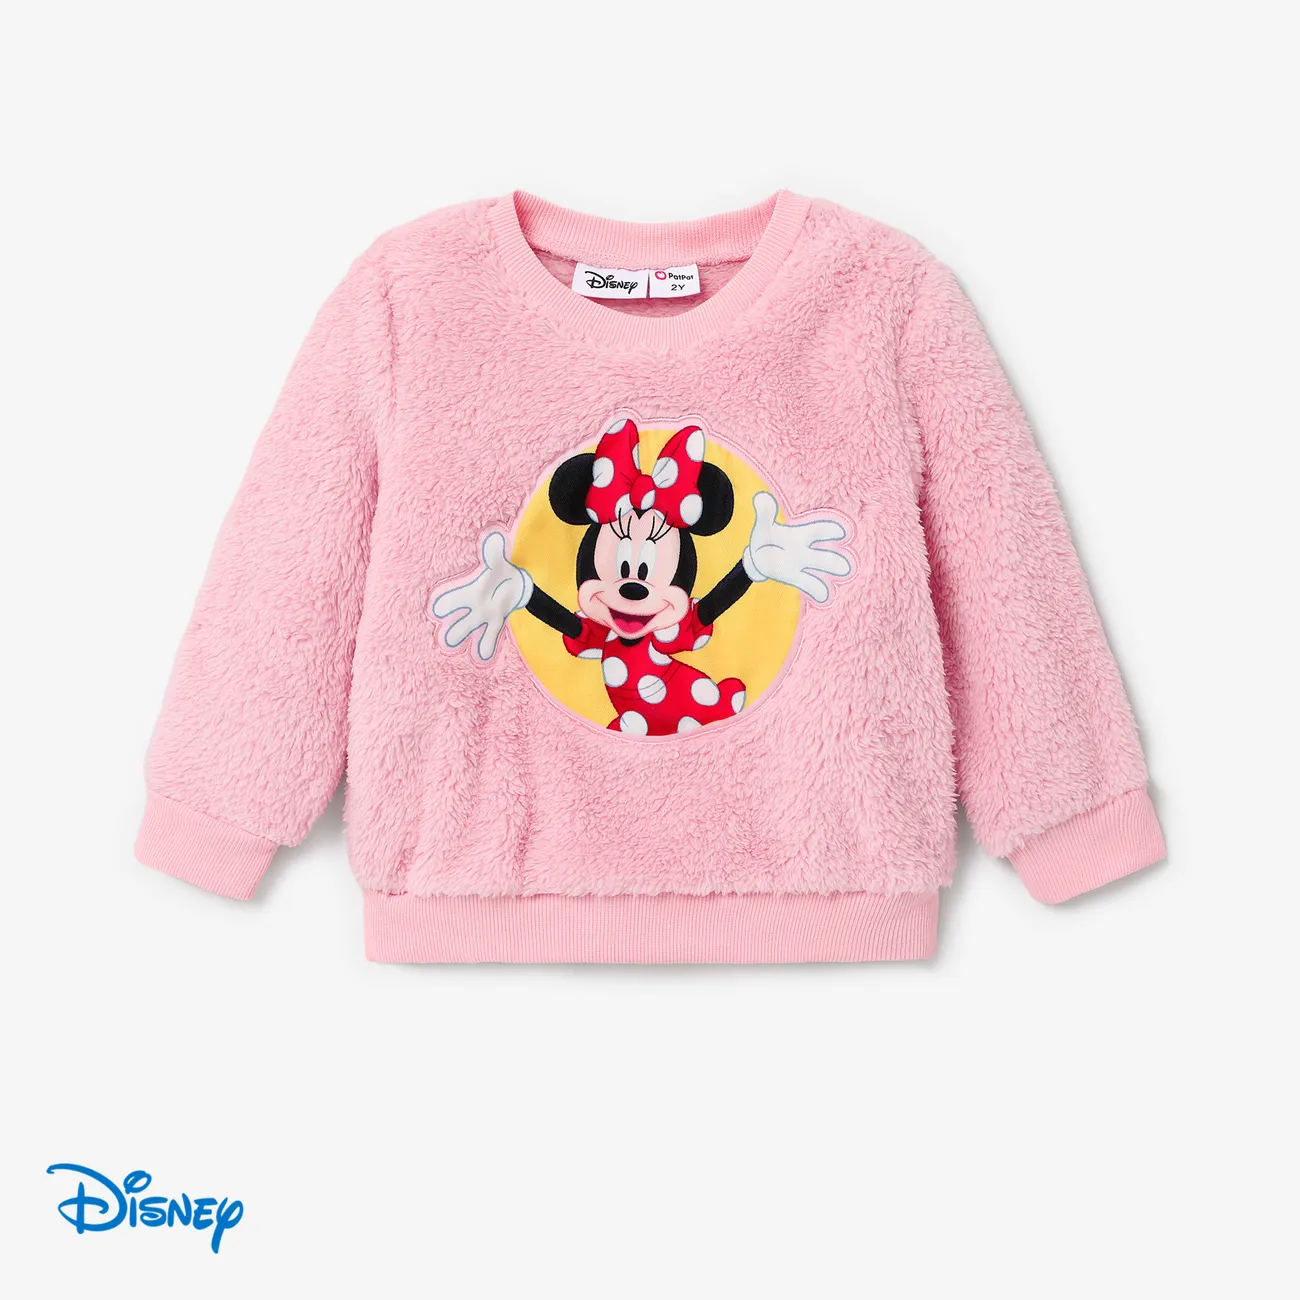 Disney Mickey and Friends Toddler Girl/Boy Character Embroidered Long-sleeve Fluffy Sweatshirt Pink big image 1